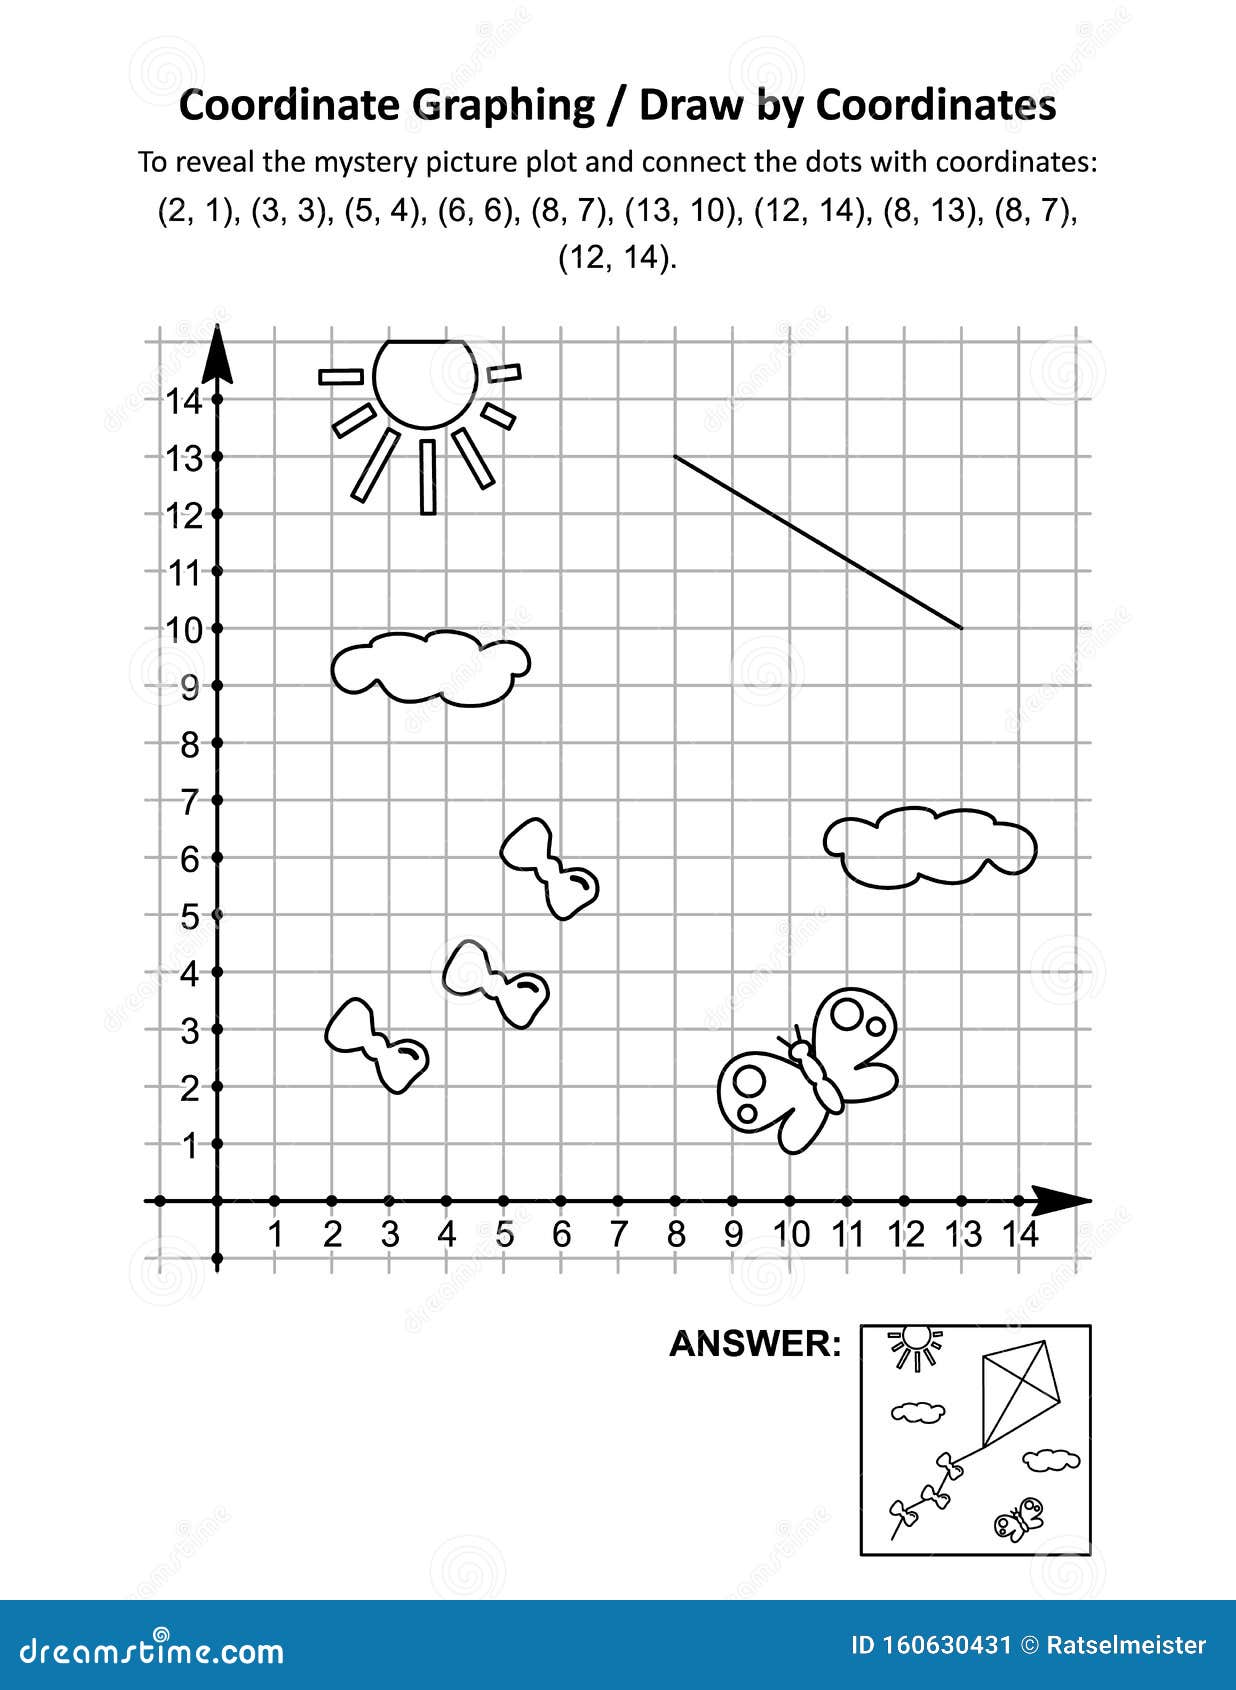 coordinate graphing, or draw by coordinates, math worksheet with flying kite